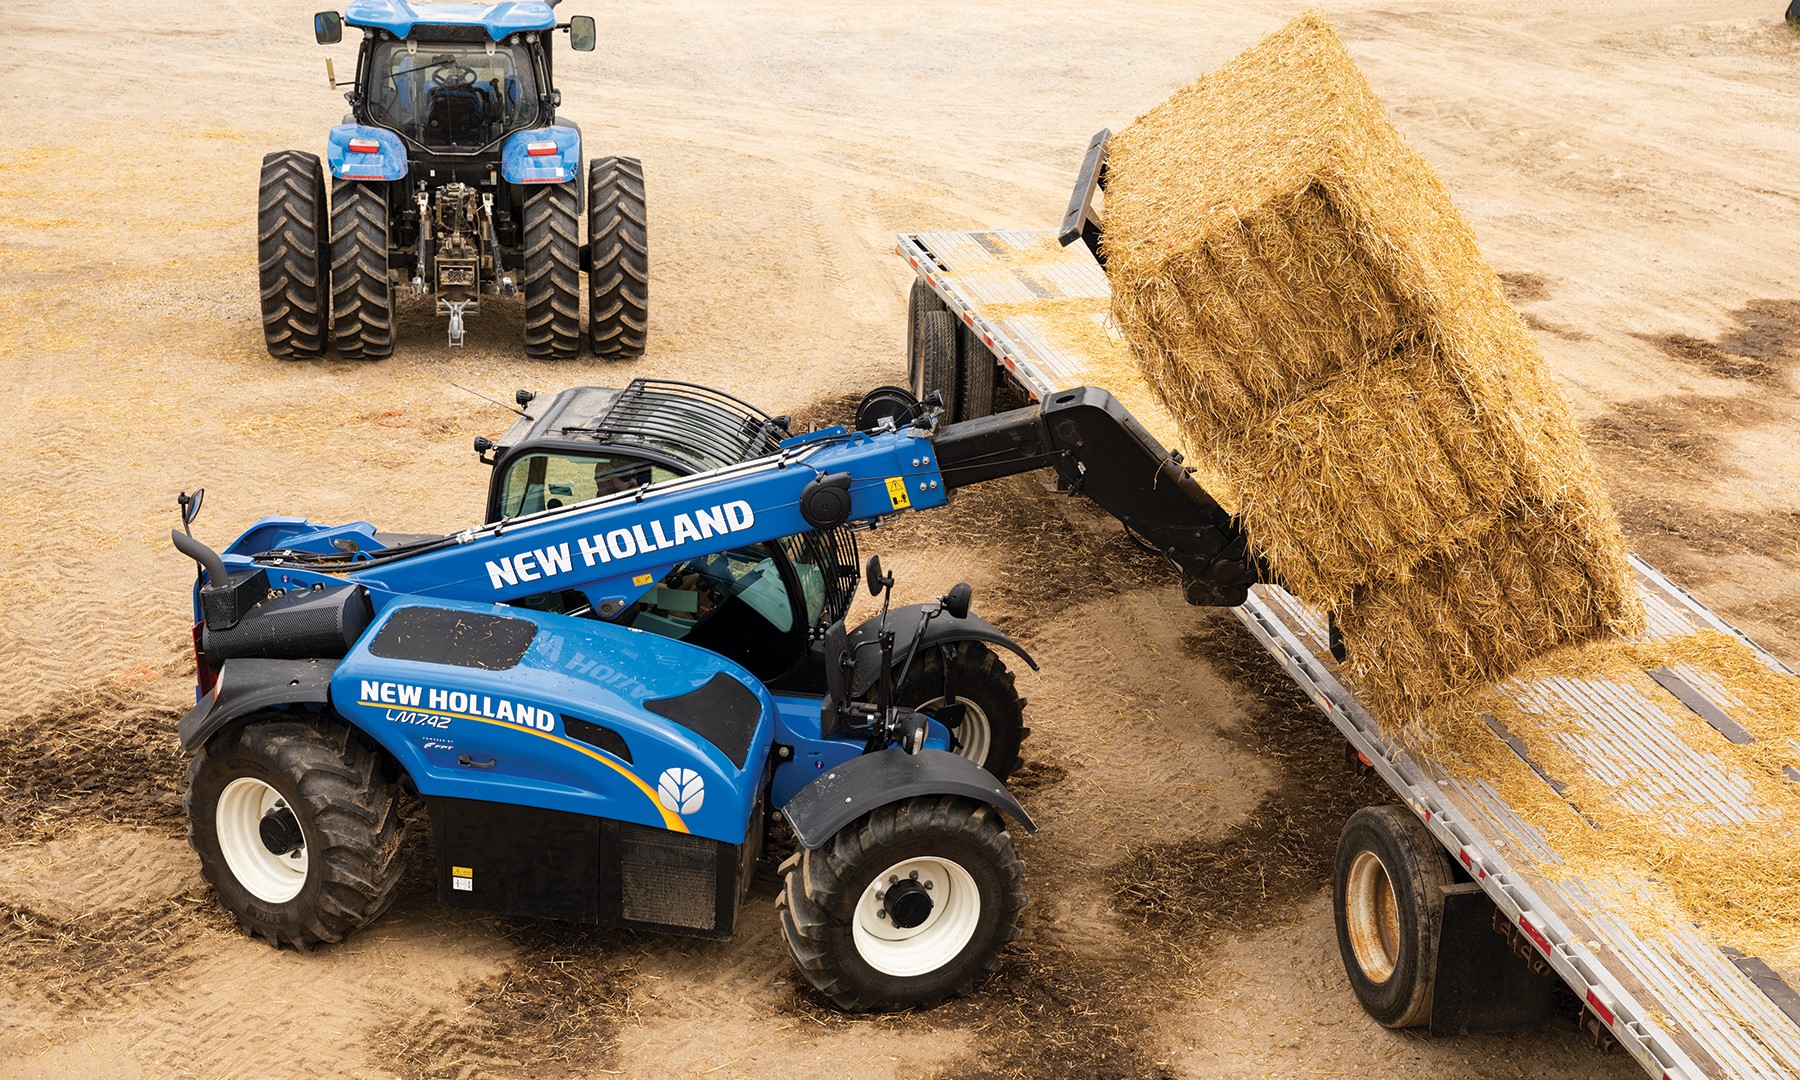 New Holland Equipment Showcased at 2018 Farm Progress Show Boosts Quality Forage Production